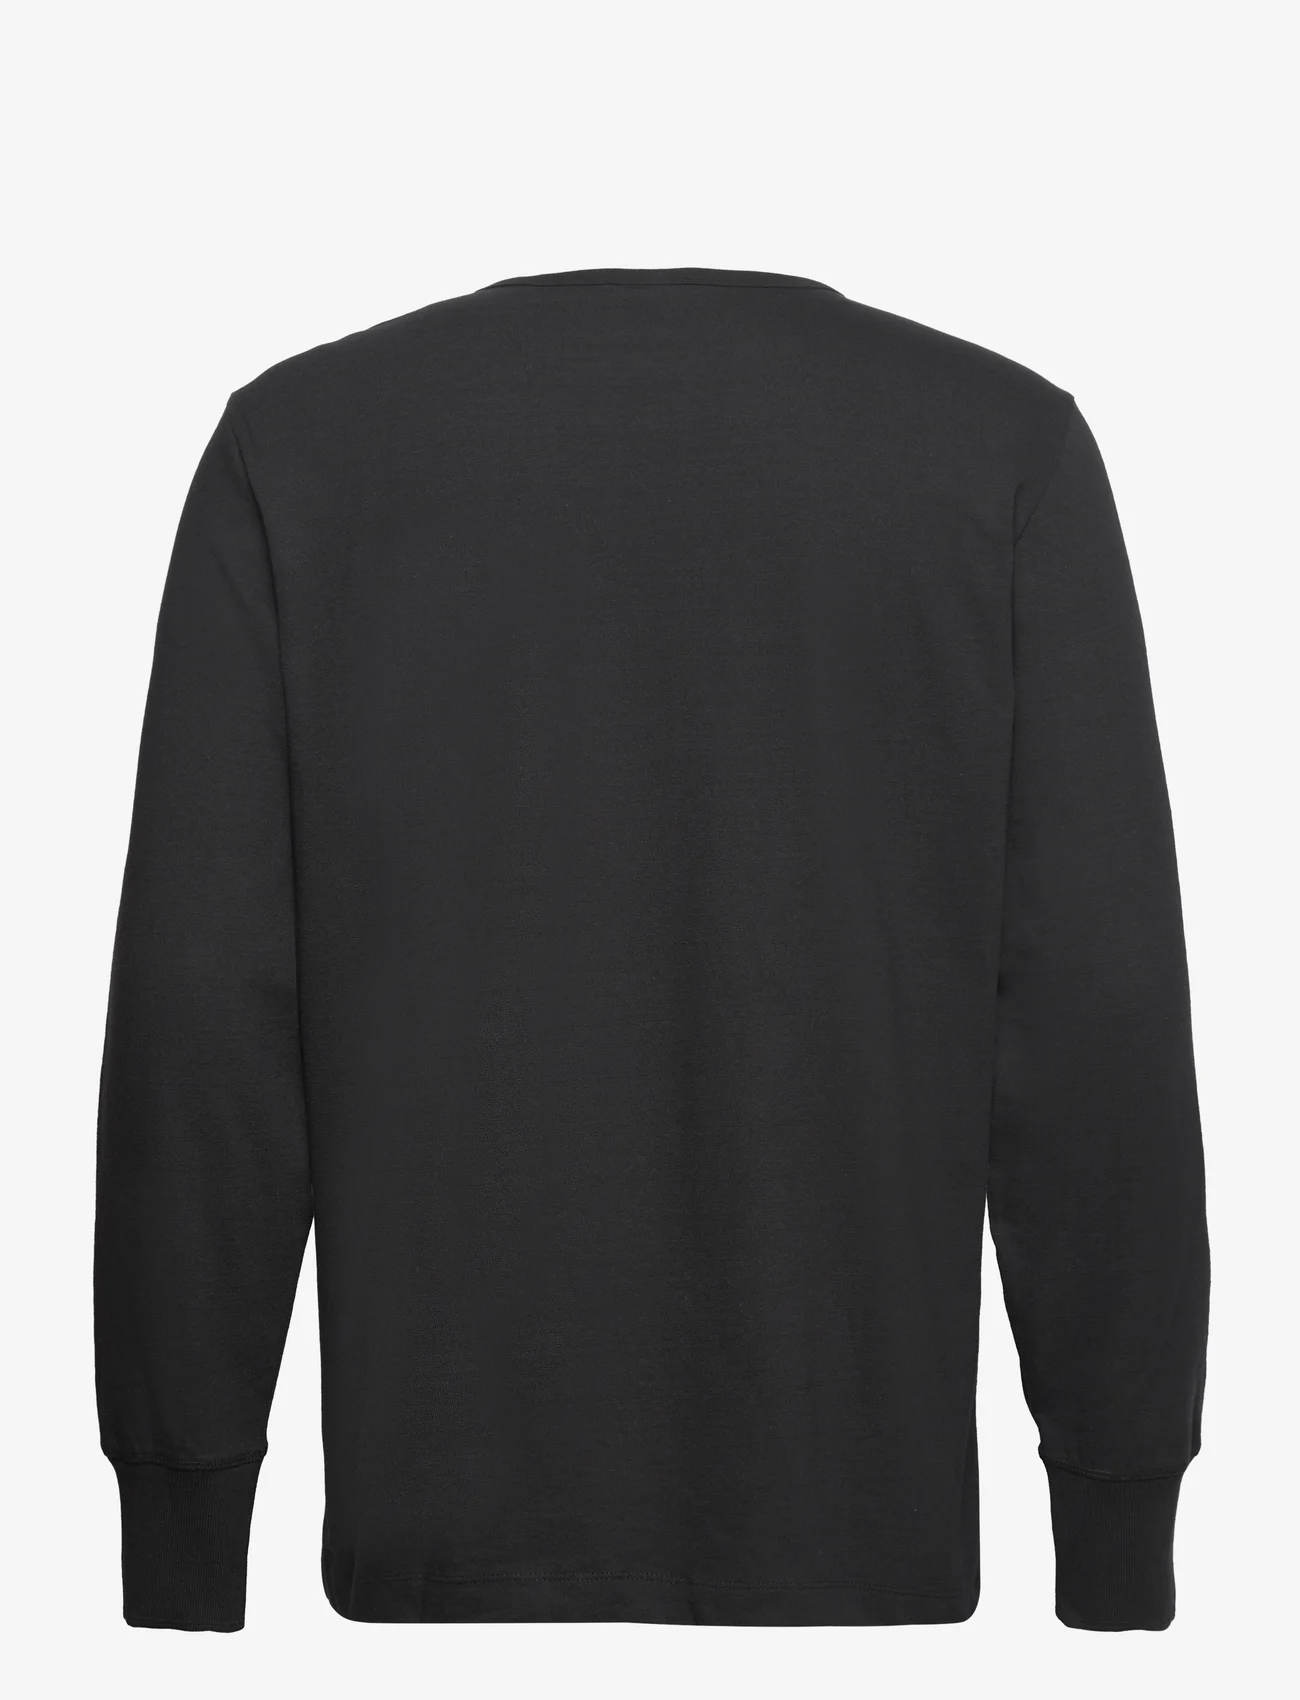 Selected Homme - SLHPHILLIP LS HENLEY NOOS - lowest prices - black - 1